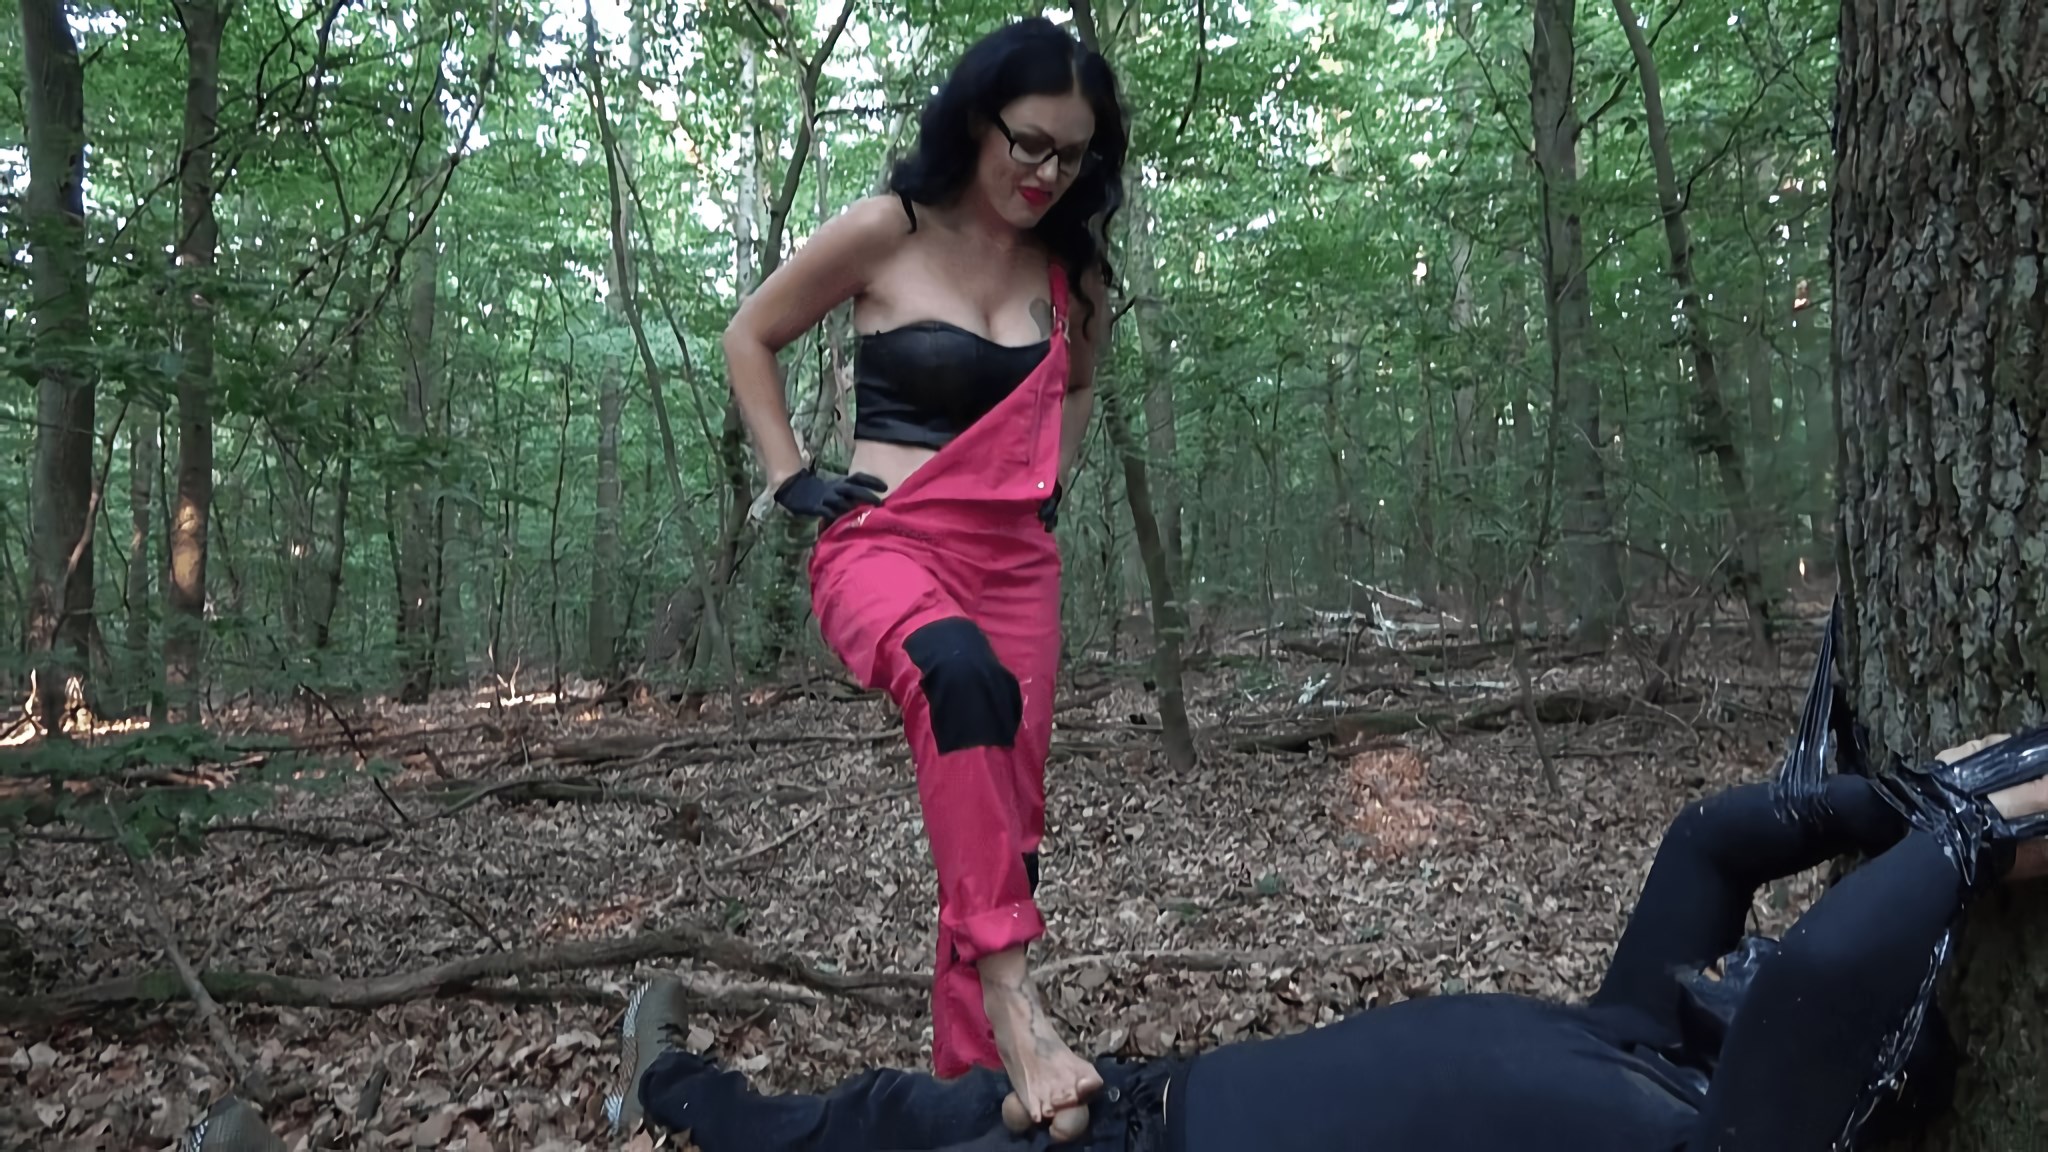 Kink Partners 'Punishment in the forest part 3' starring Lady Blackdiamond (Photo 2)